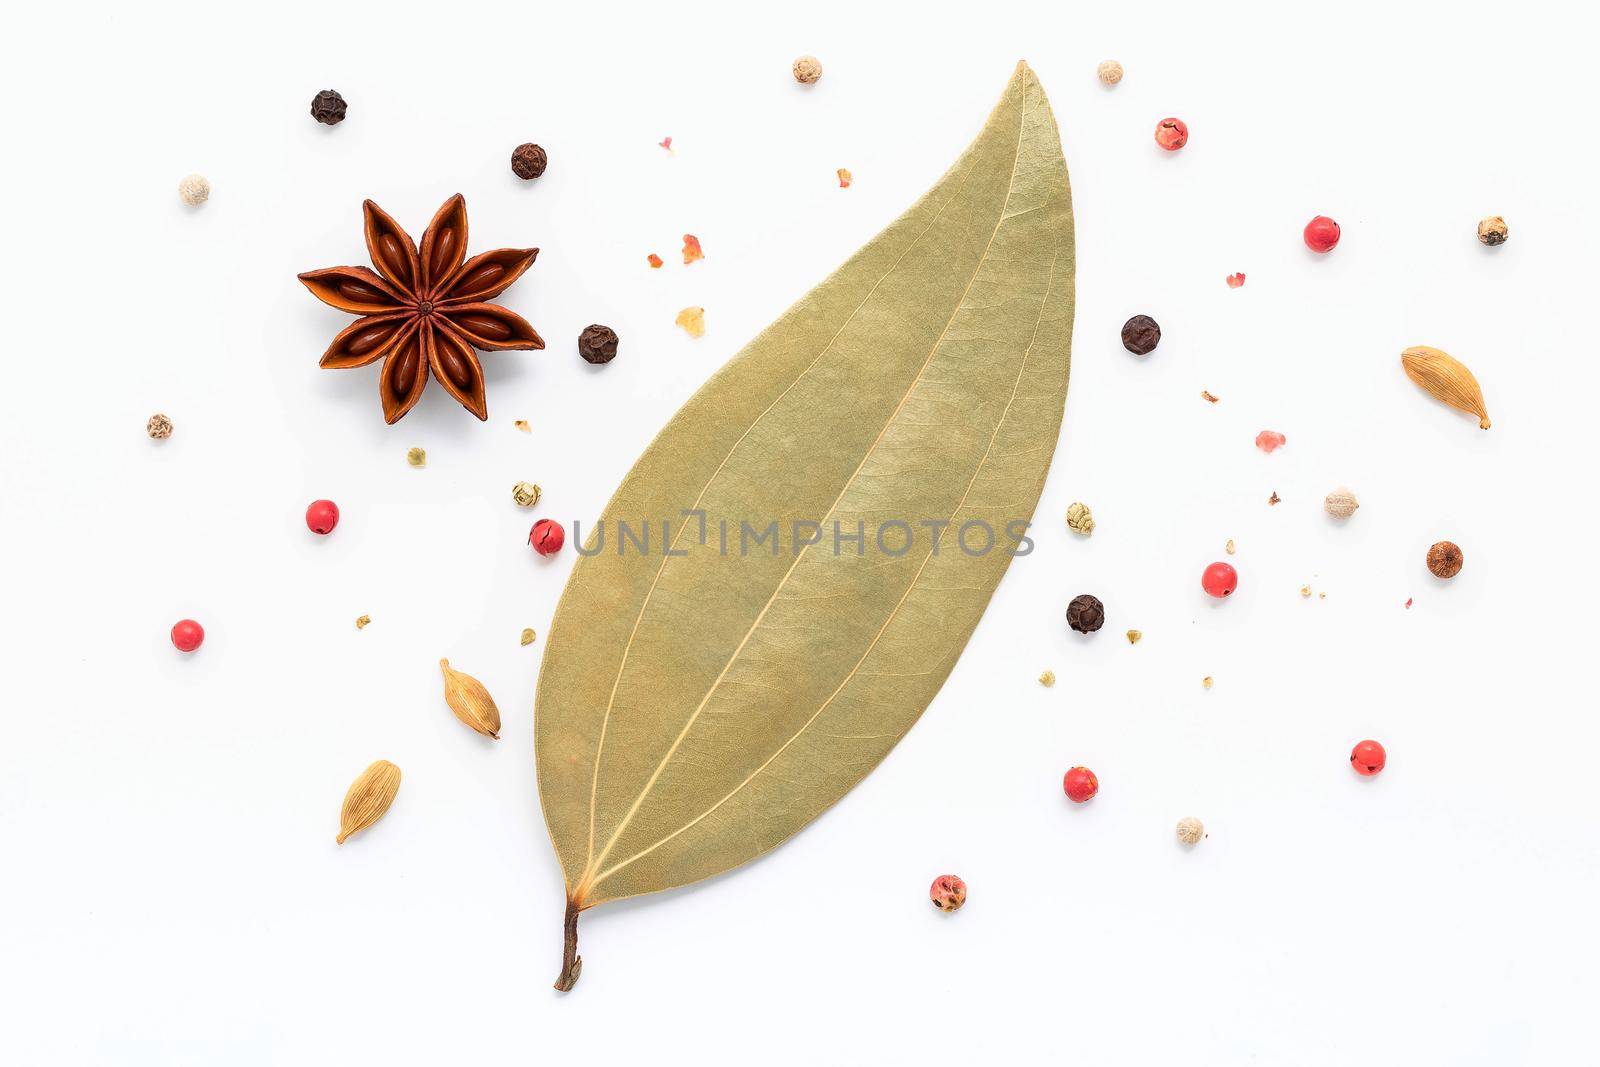 Cinnamon sticks, star anise and spices isolated on white background. by kerdkanno